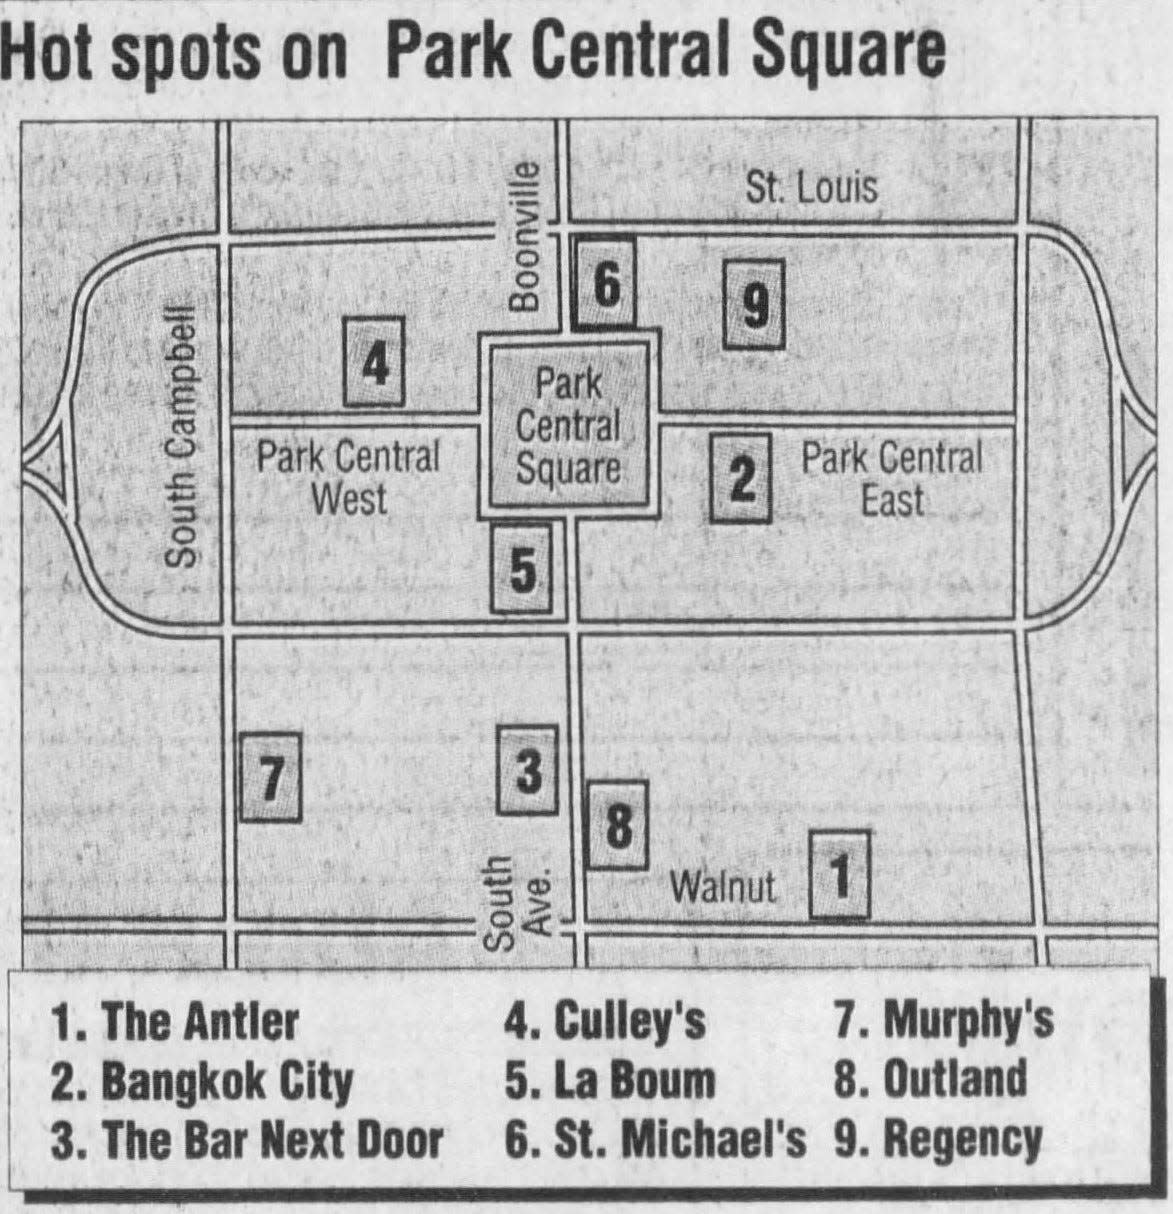 A map illustrating "Hot spots on Park Central Square" from the News-Leader on Sept. 9, 1993. The Outland was among nine venues listed on the map.